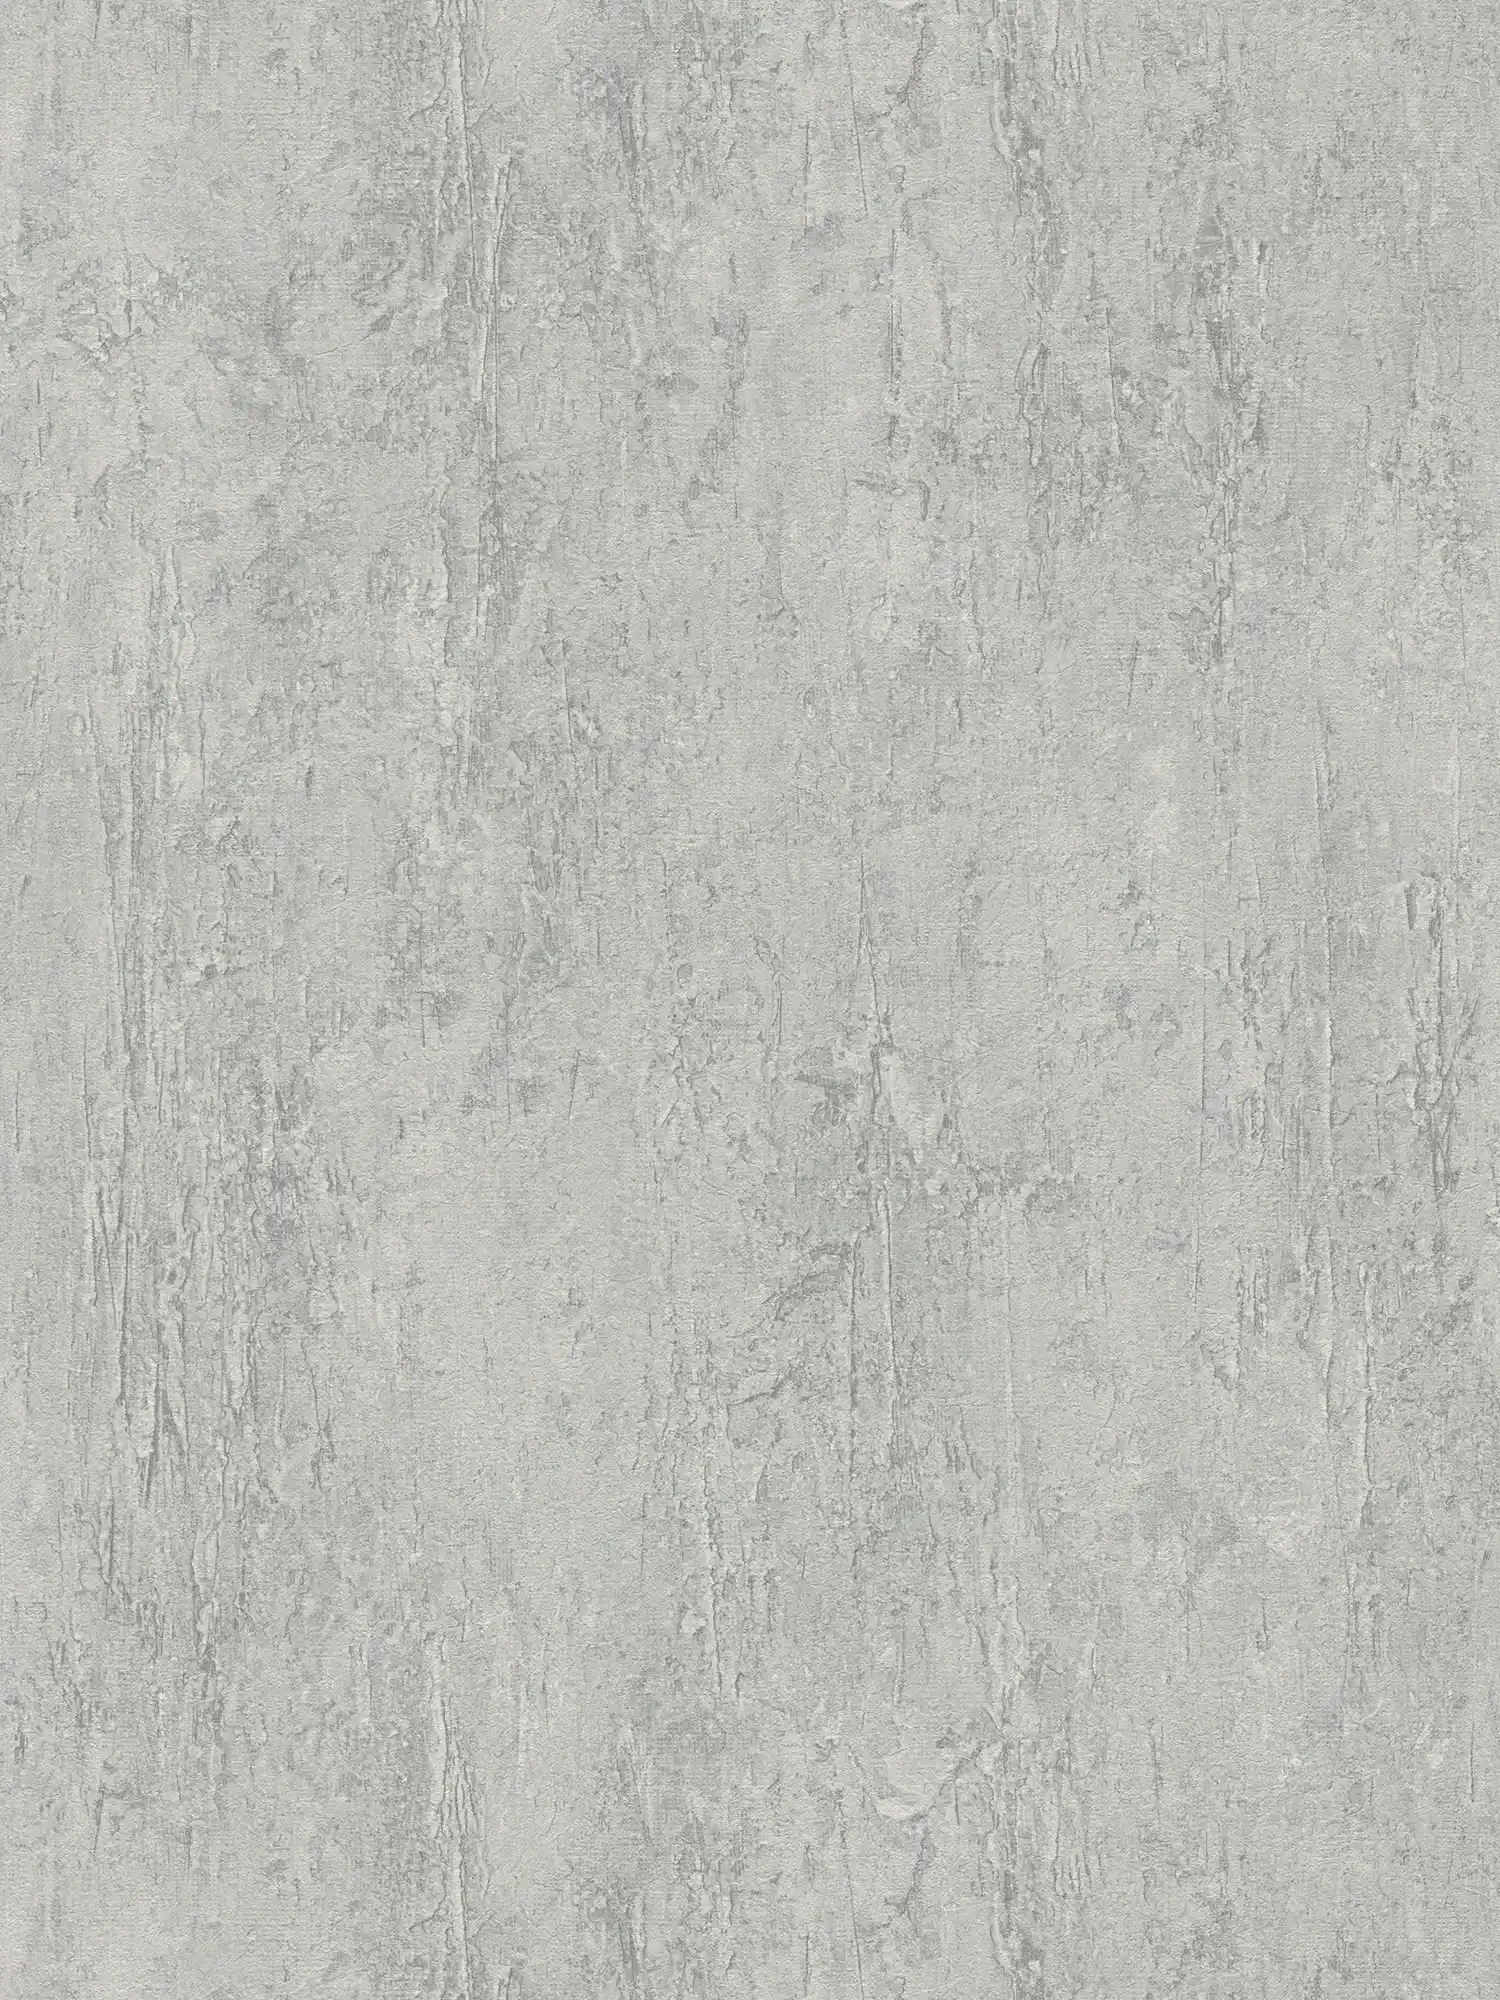 Non-woven wallpaper with natural textured pattern and concrete look - grey
